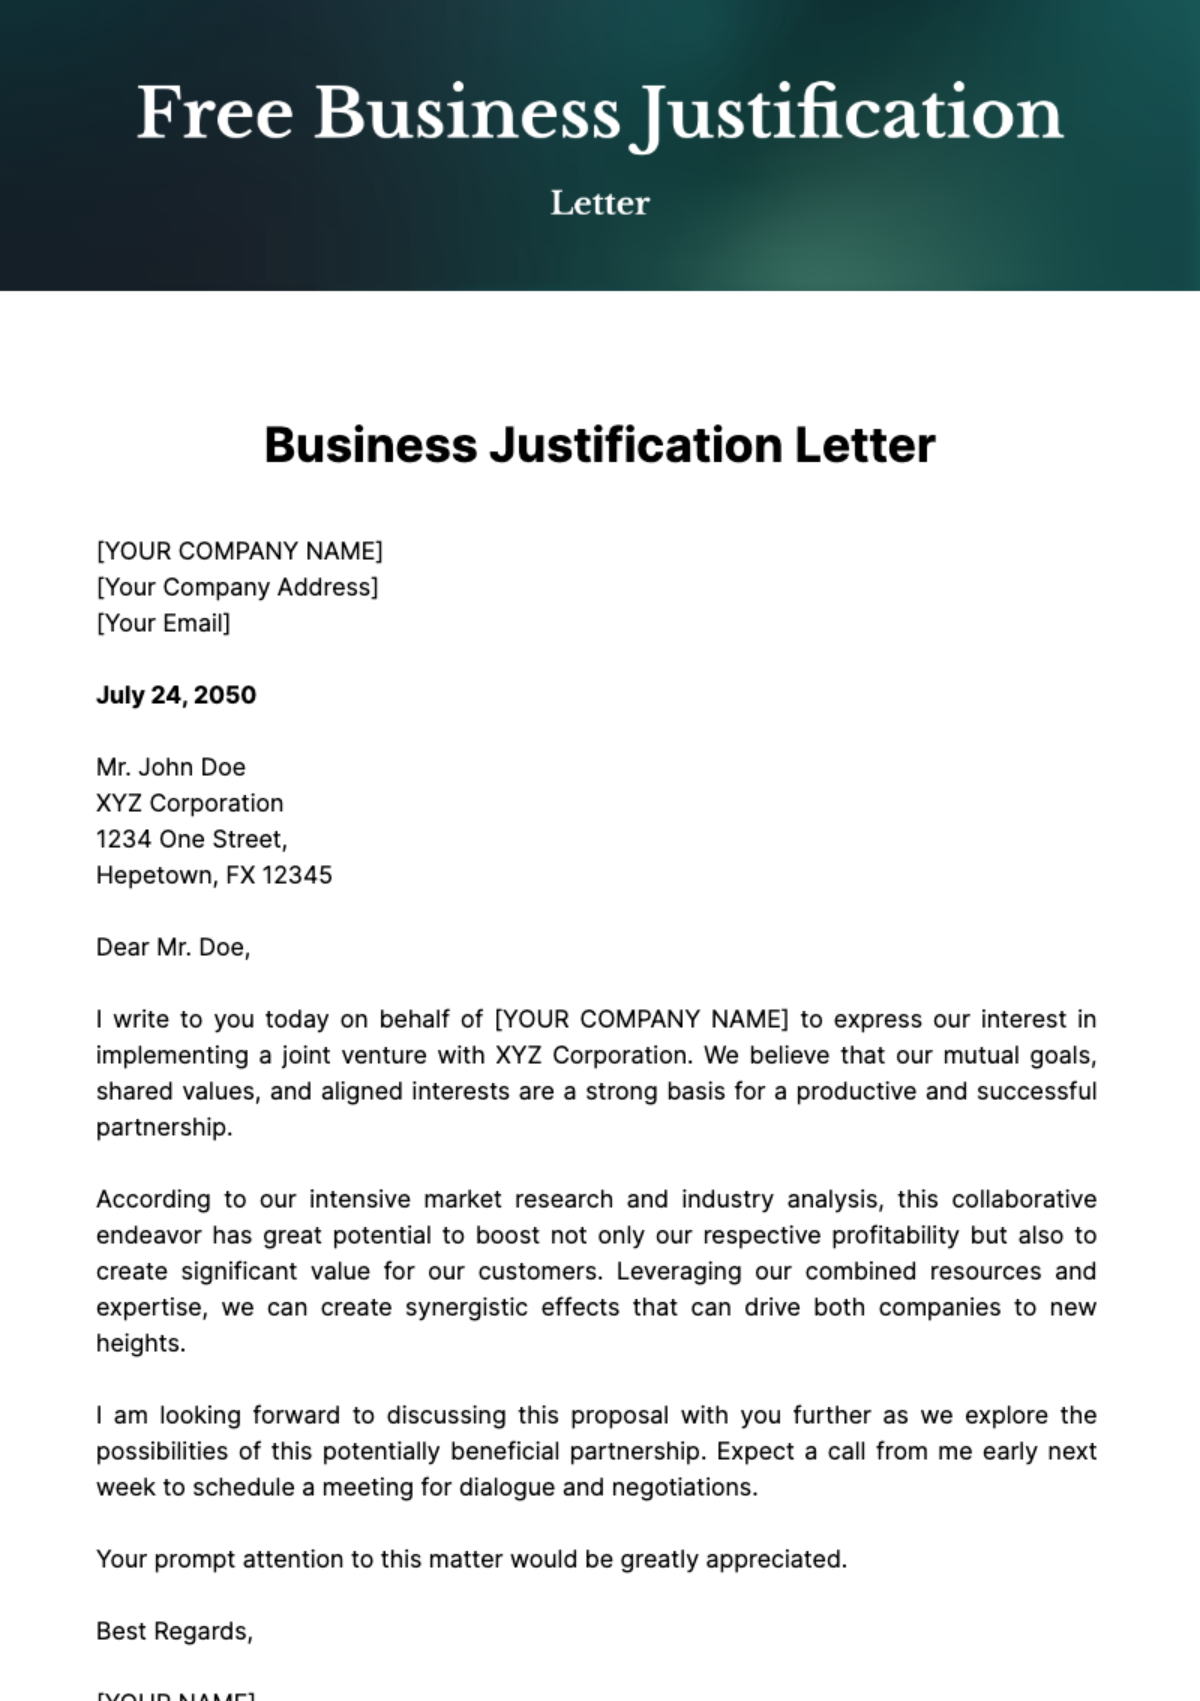 Free Business Justification Letter Template